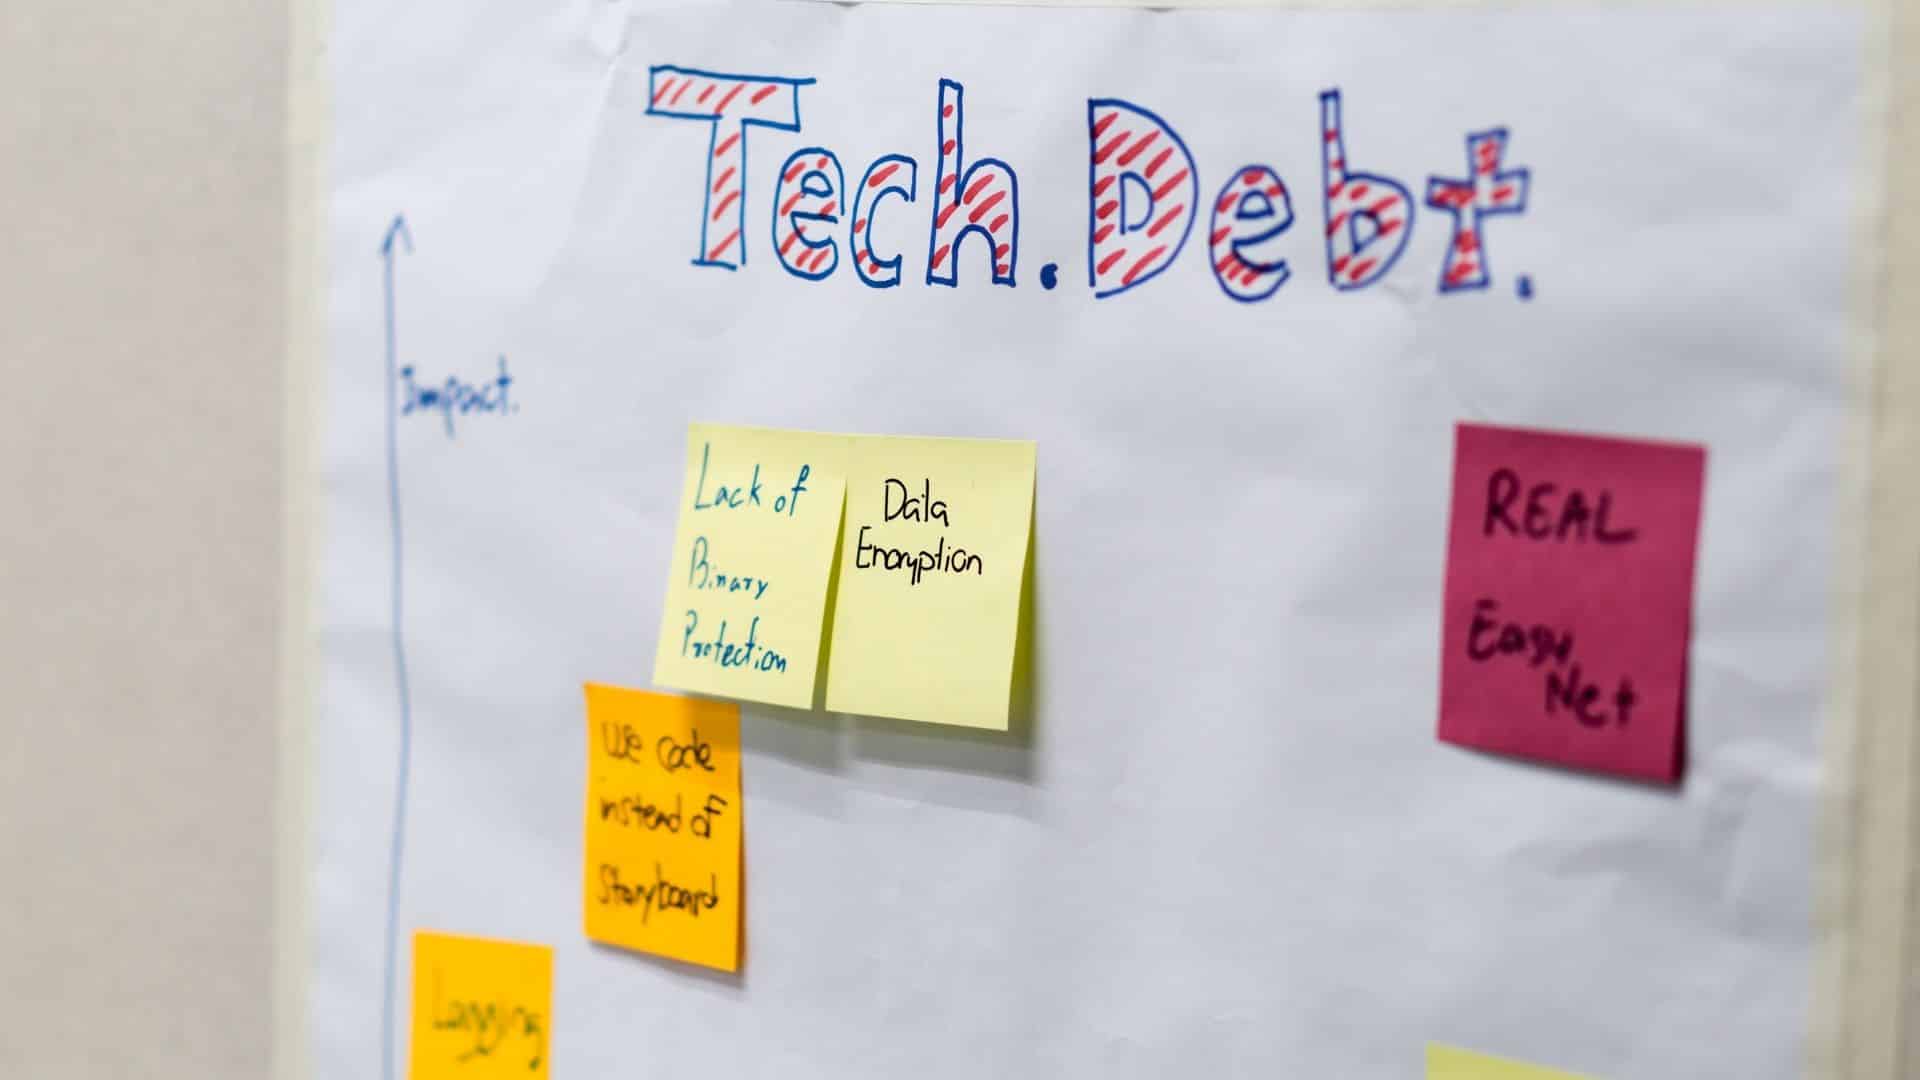 REI Systems in Nextgov: How to Overcome Technical Debt in IT Modernization Projects